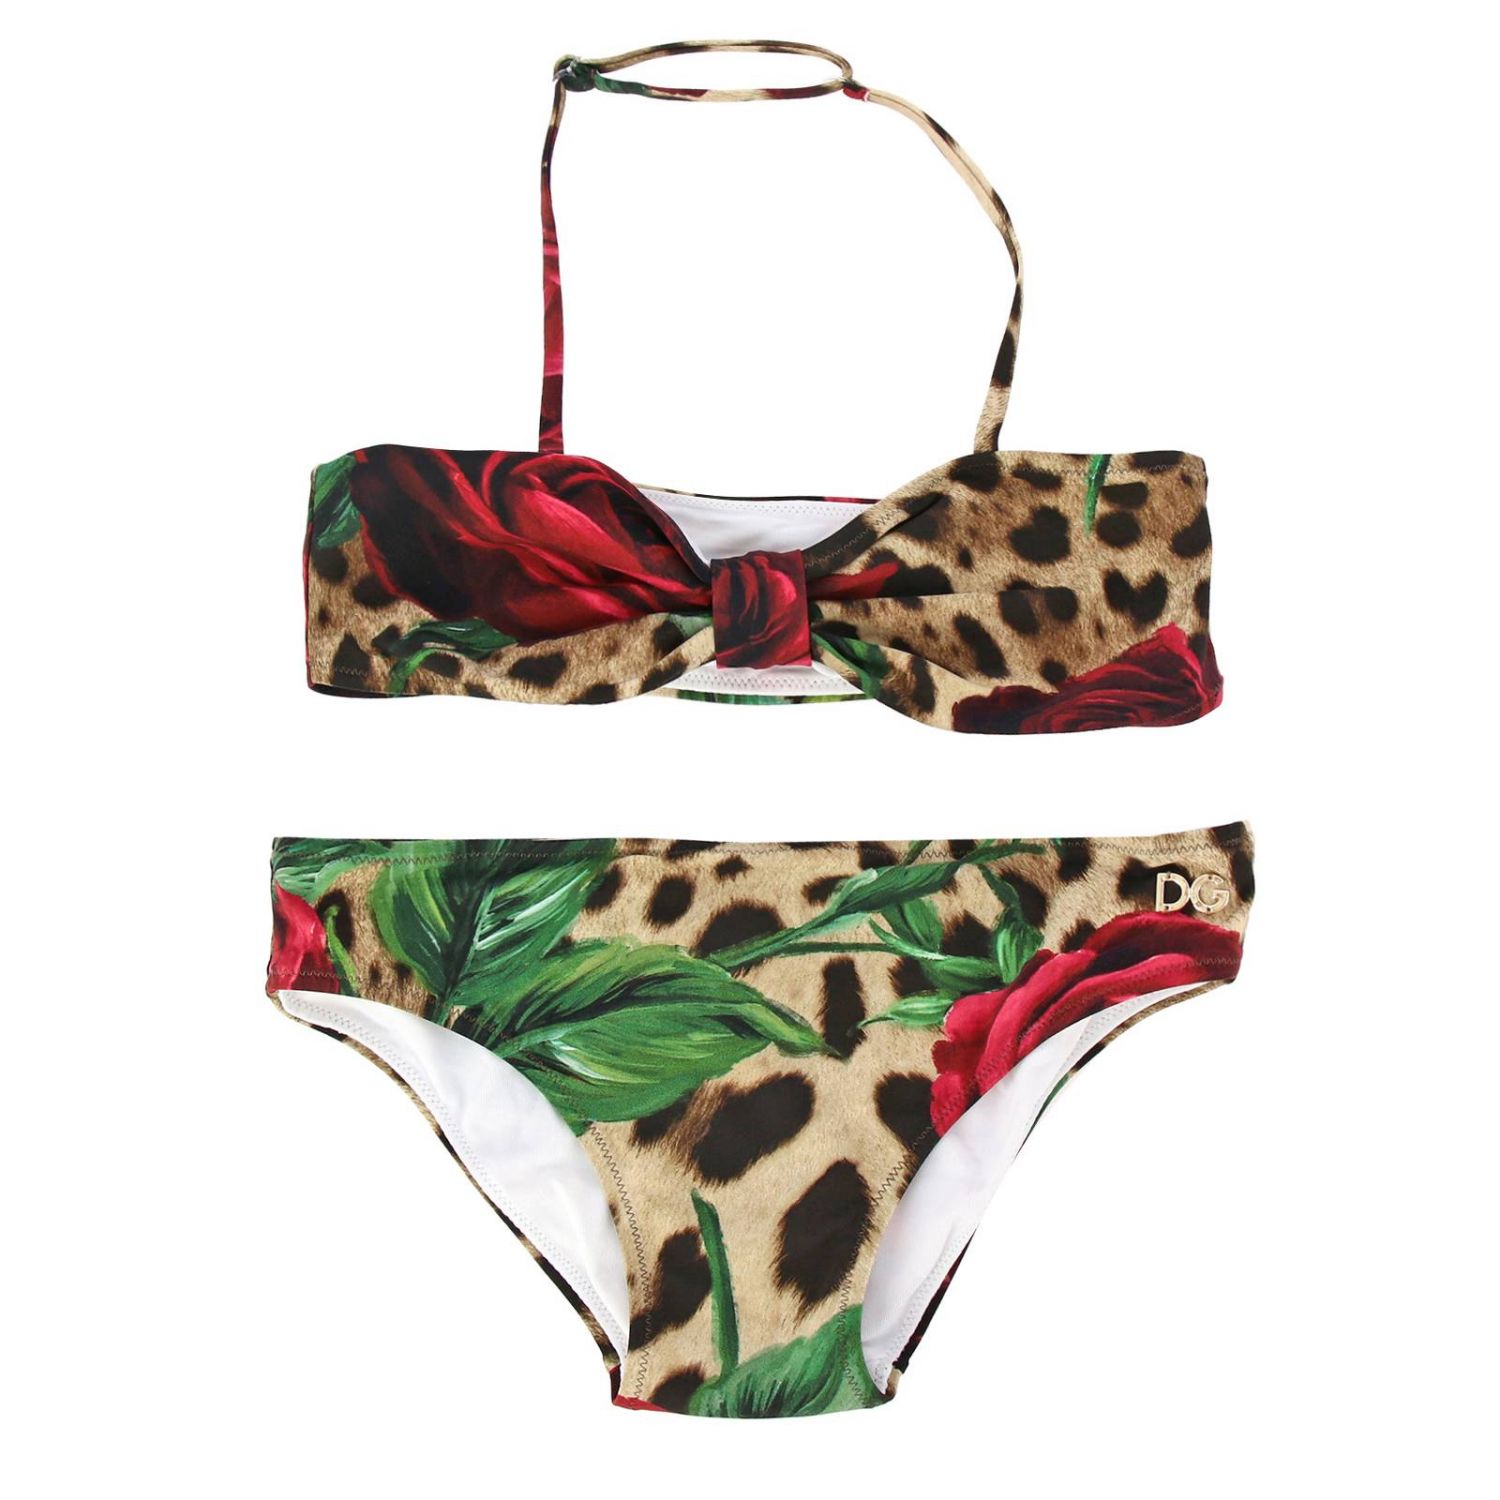 Dolce & Gabbana Outlet: Swimsuit kids - Multicolor | Swimsuit Dolce ...